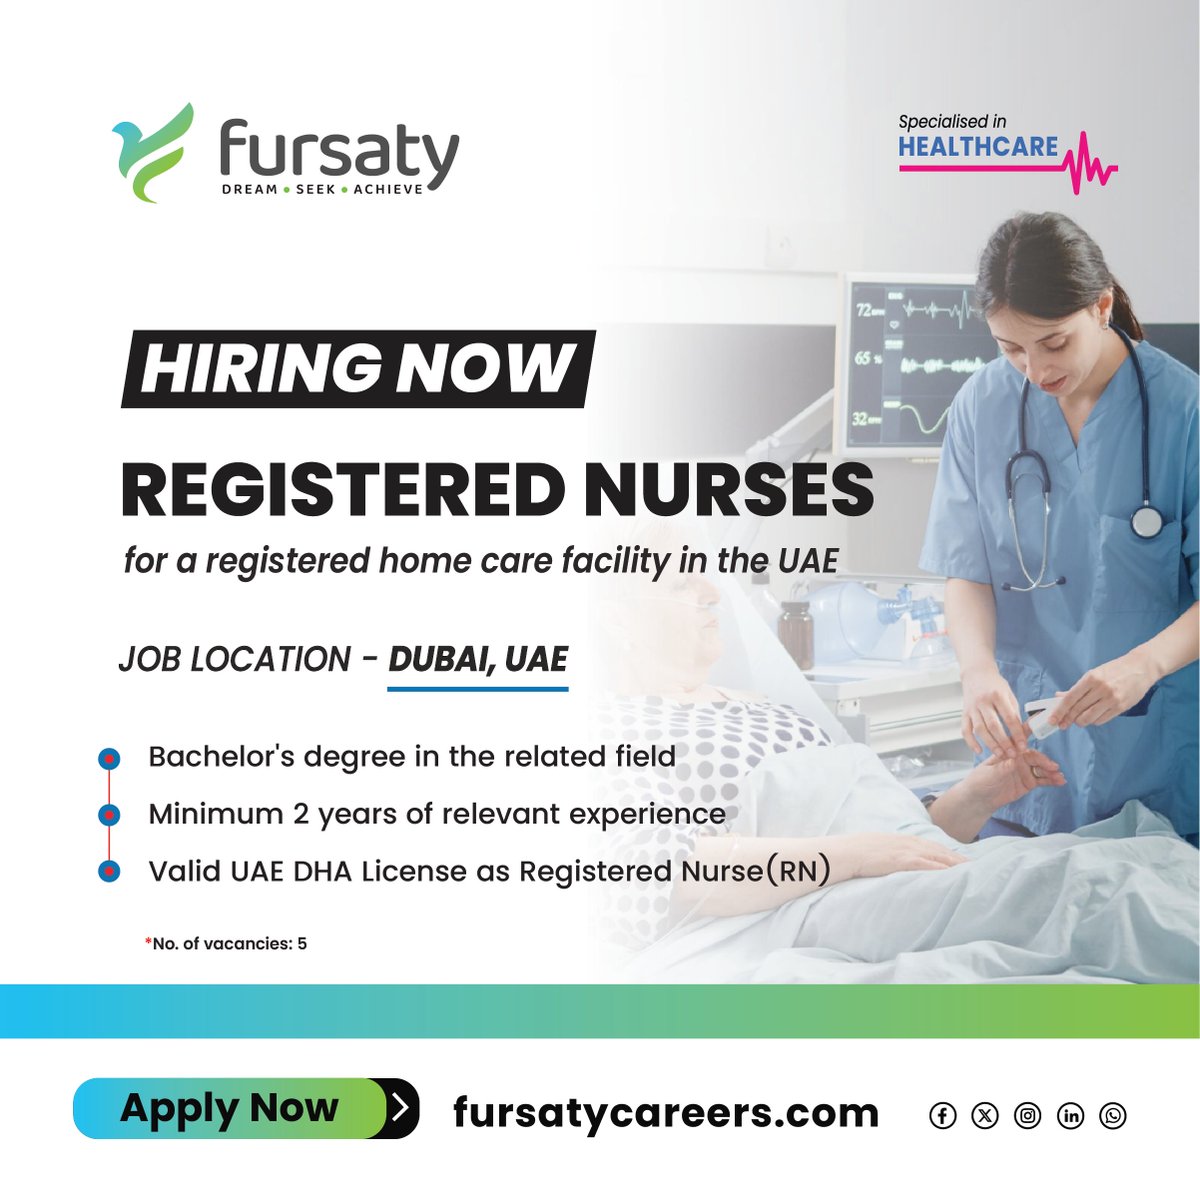 📢 #HiringNurses: Exciting opportunity for dedicated #RegisteredNurses at a registered home care facility in Dubai, UAE! 📍

📌 Explore #FursatyCareers Website for details and #ApplyNow!
🔗 fursatycareers.com/en/jobs/regist…

🤝 Tag fellow #Nurses who might be interested! 👩🏻‍🏭 #JobOpening